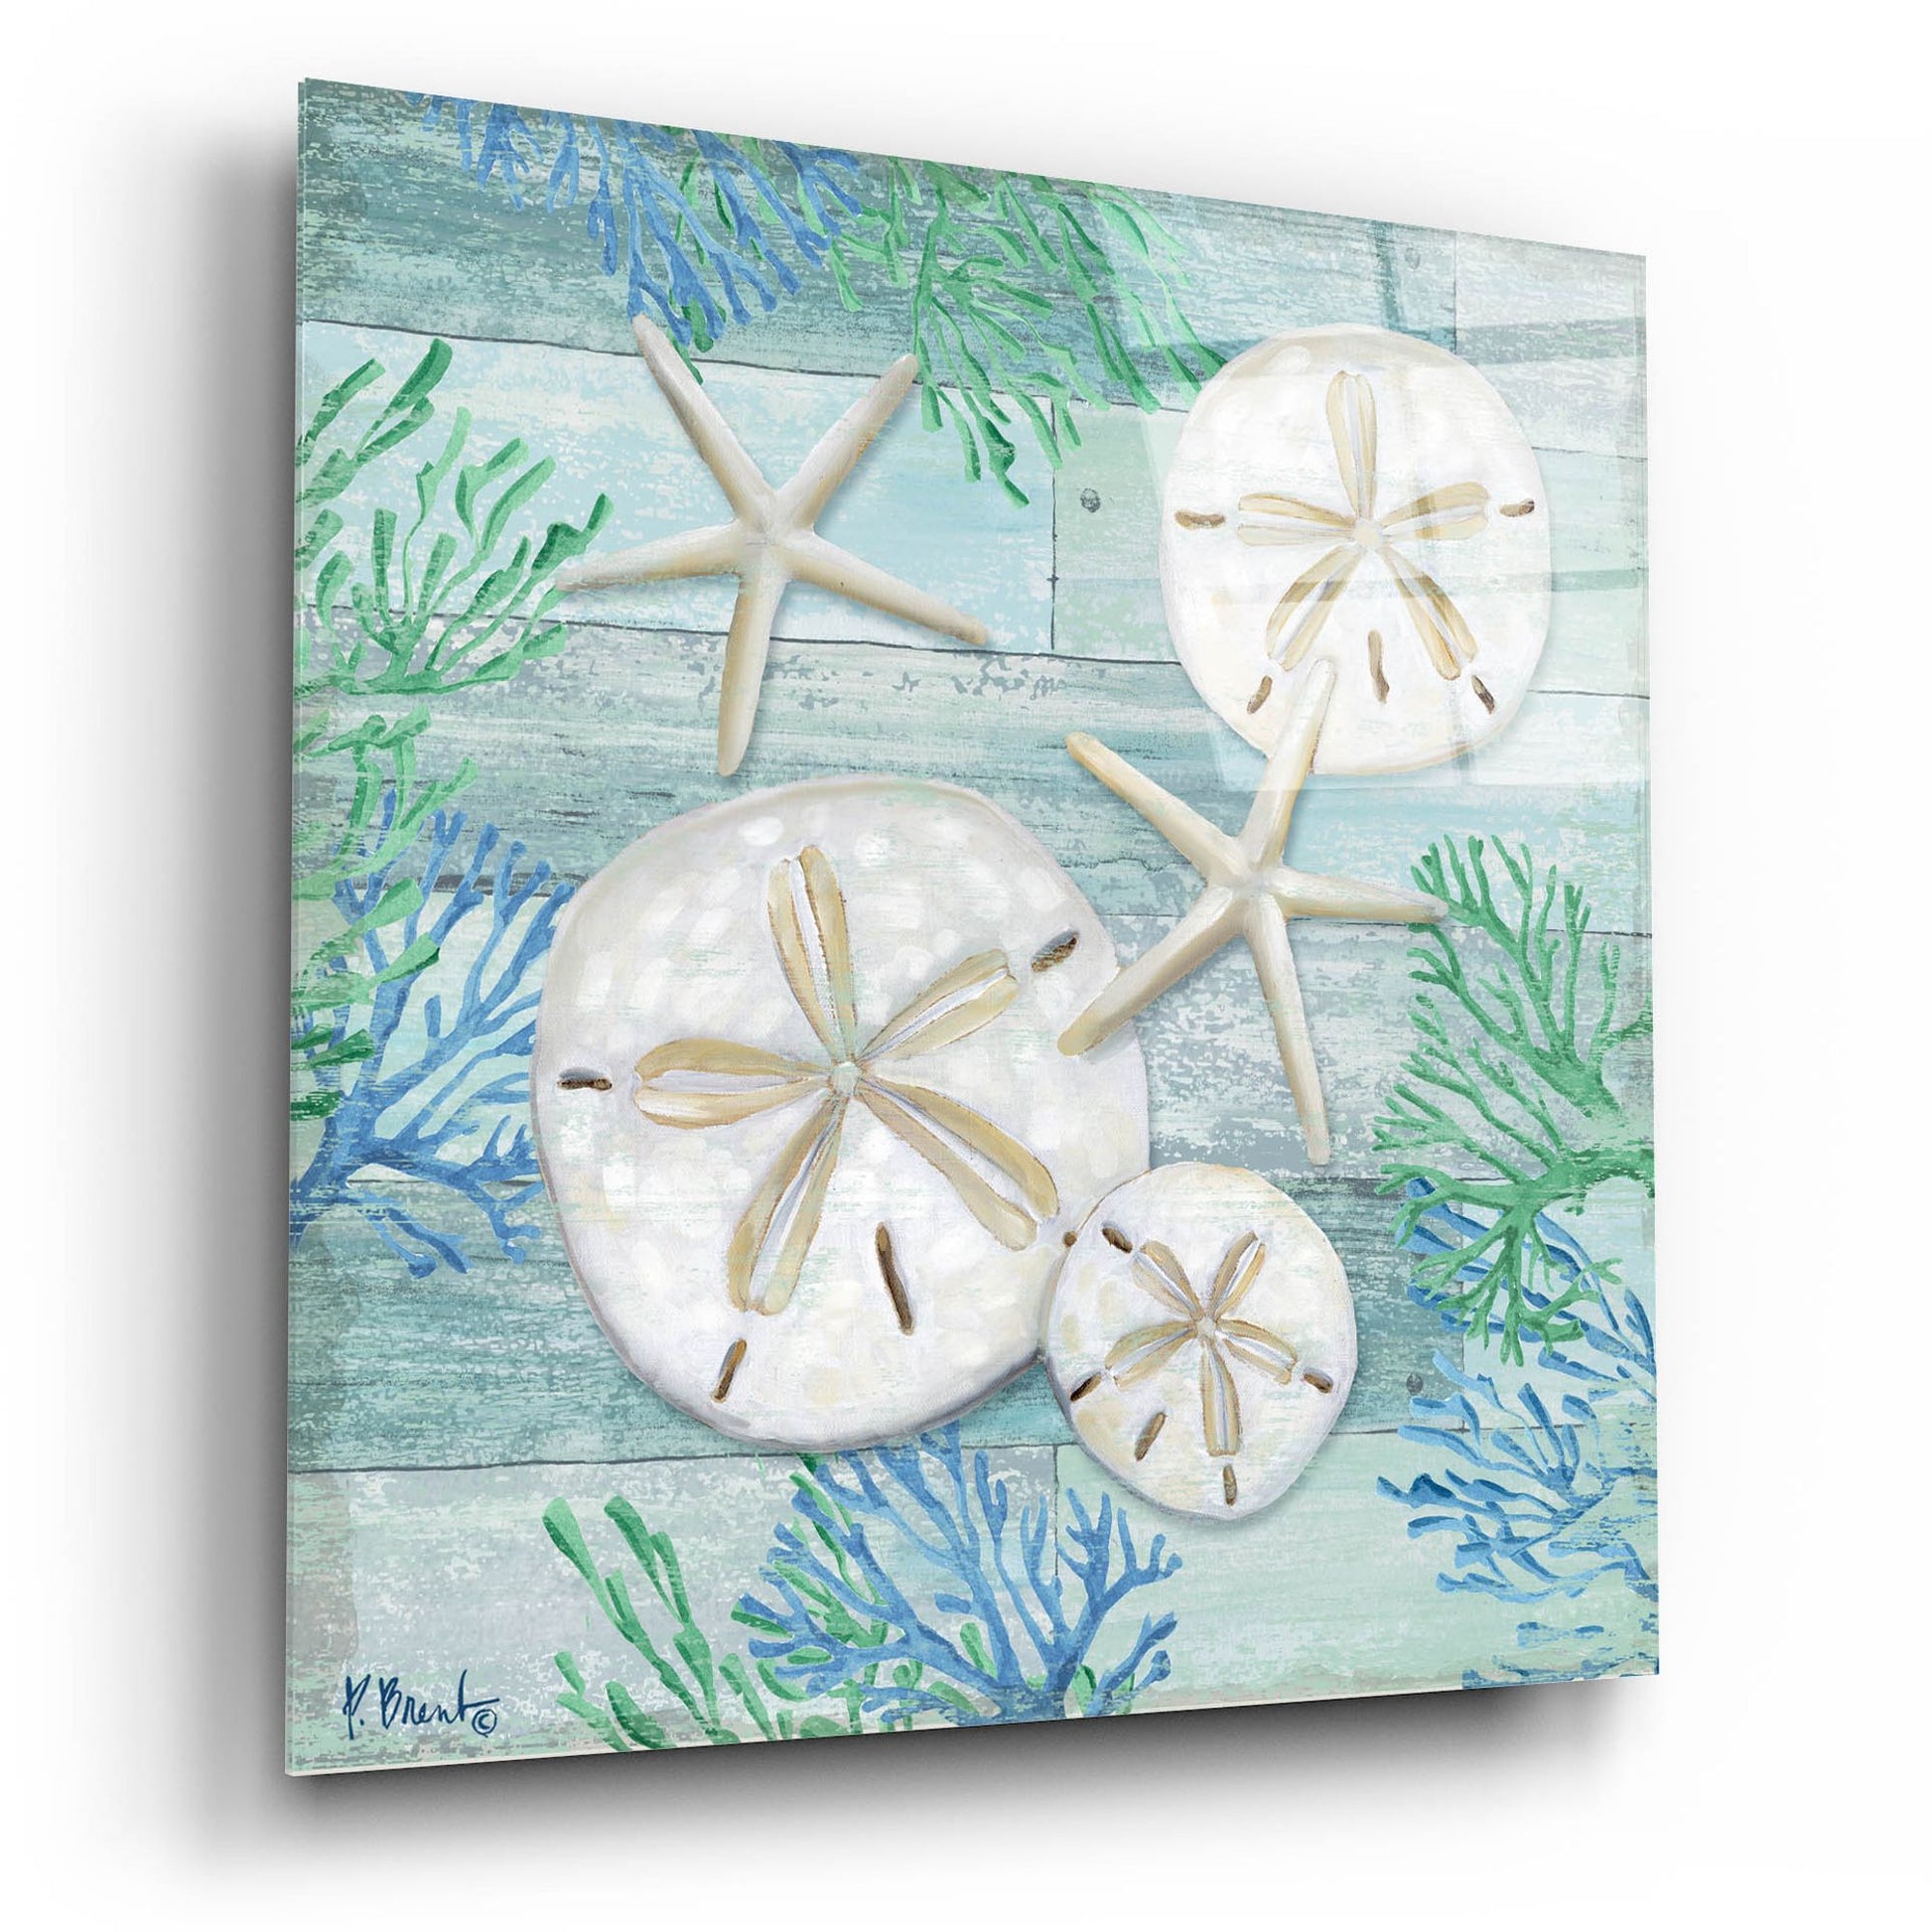 Epic Art 'Clearwater Shells I' by Paul Brent, Acrylic Glass Wall Art,12x12